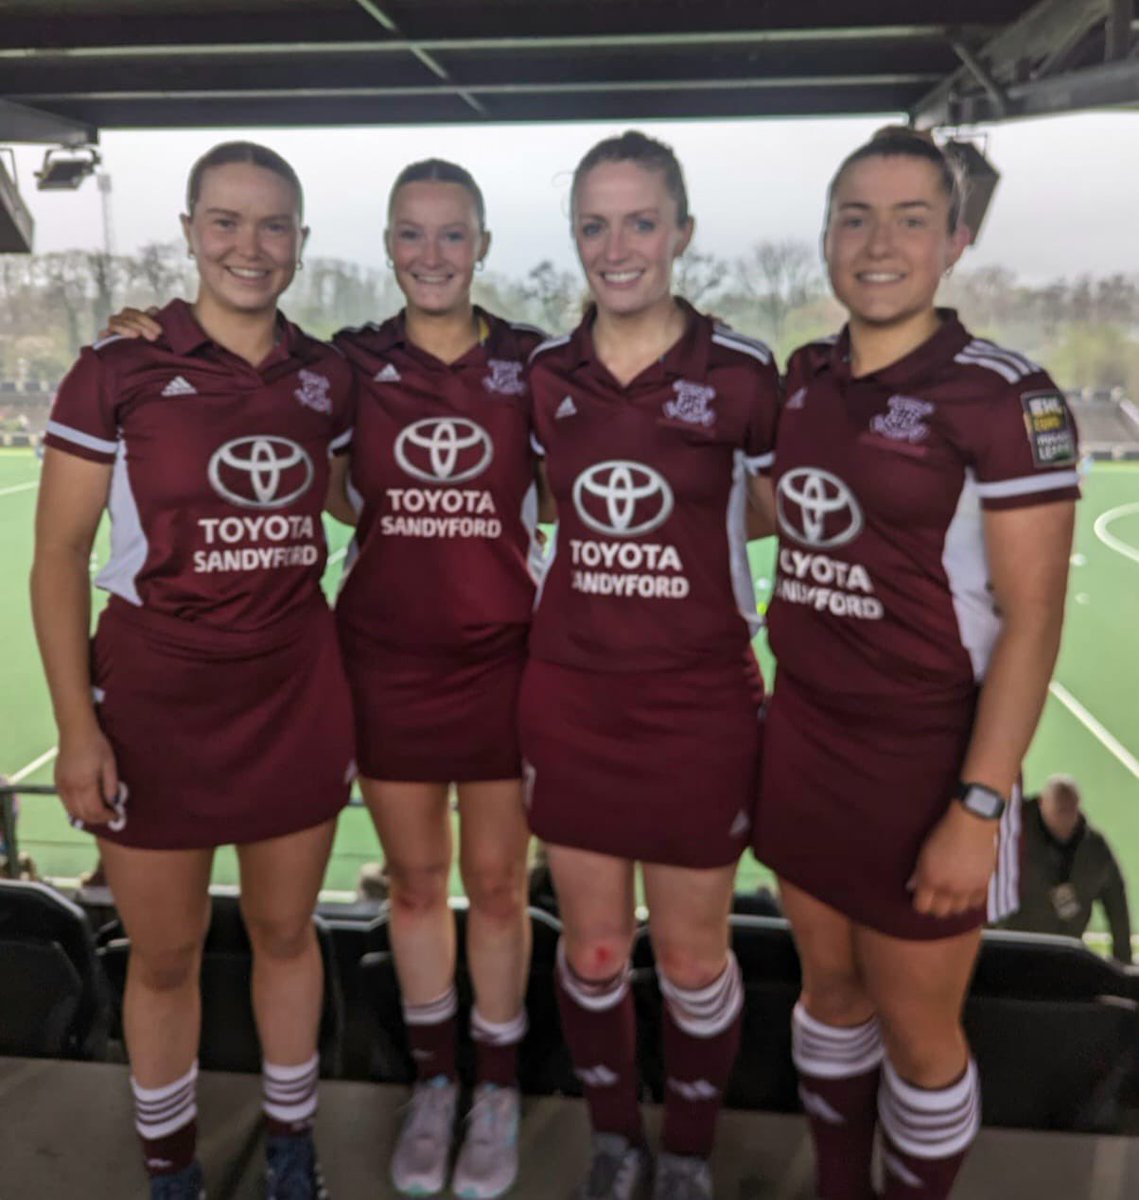 Our hockey coaches had a busy Easter weekend playing for @LoretoHC in the Euro Hockey League finals in Amsterdam. An incredible achievement to be playing against other top European clubs. Congratulations to Aisling, Grace, Hannah and Rachel 👏🏻🏑